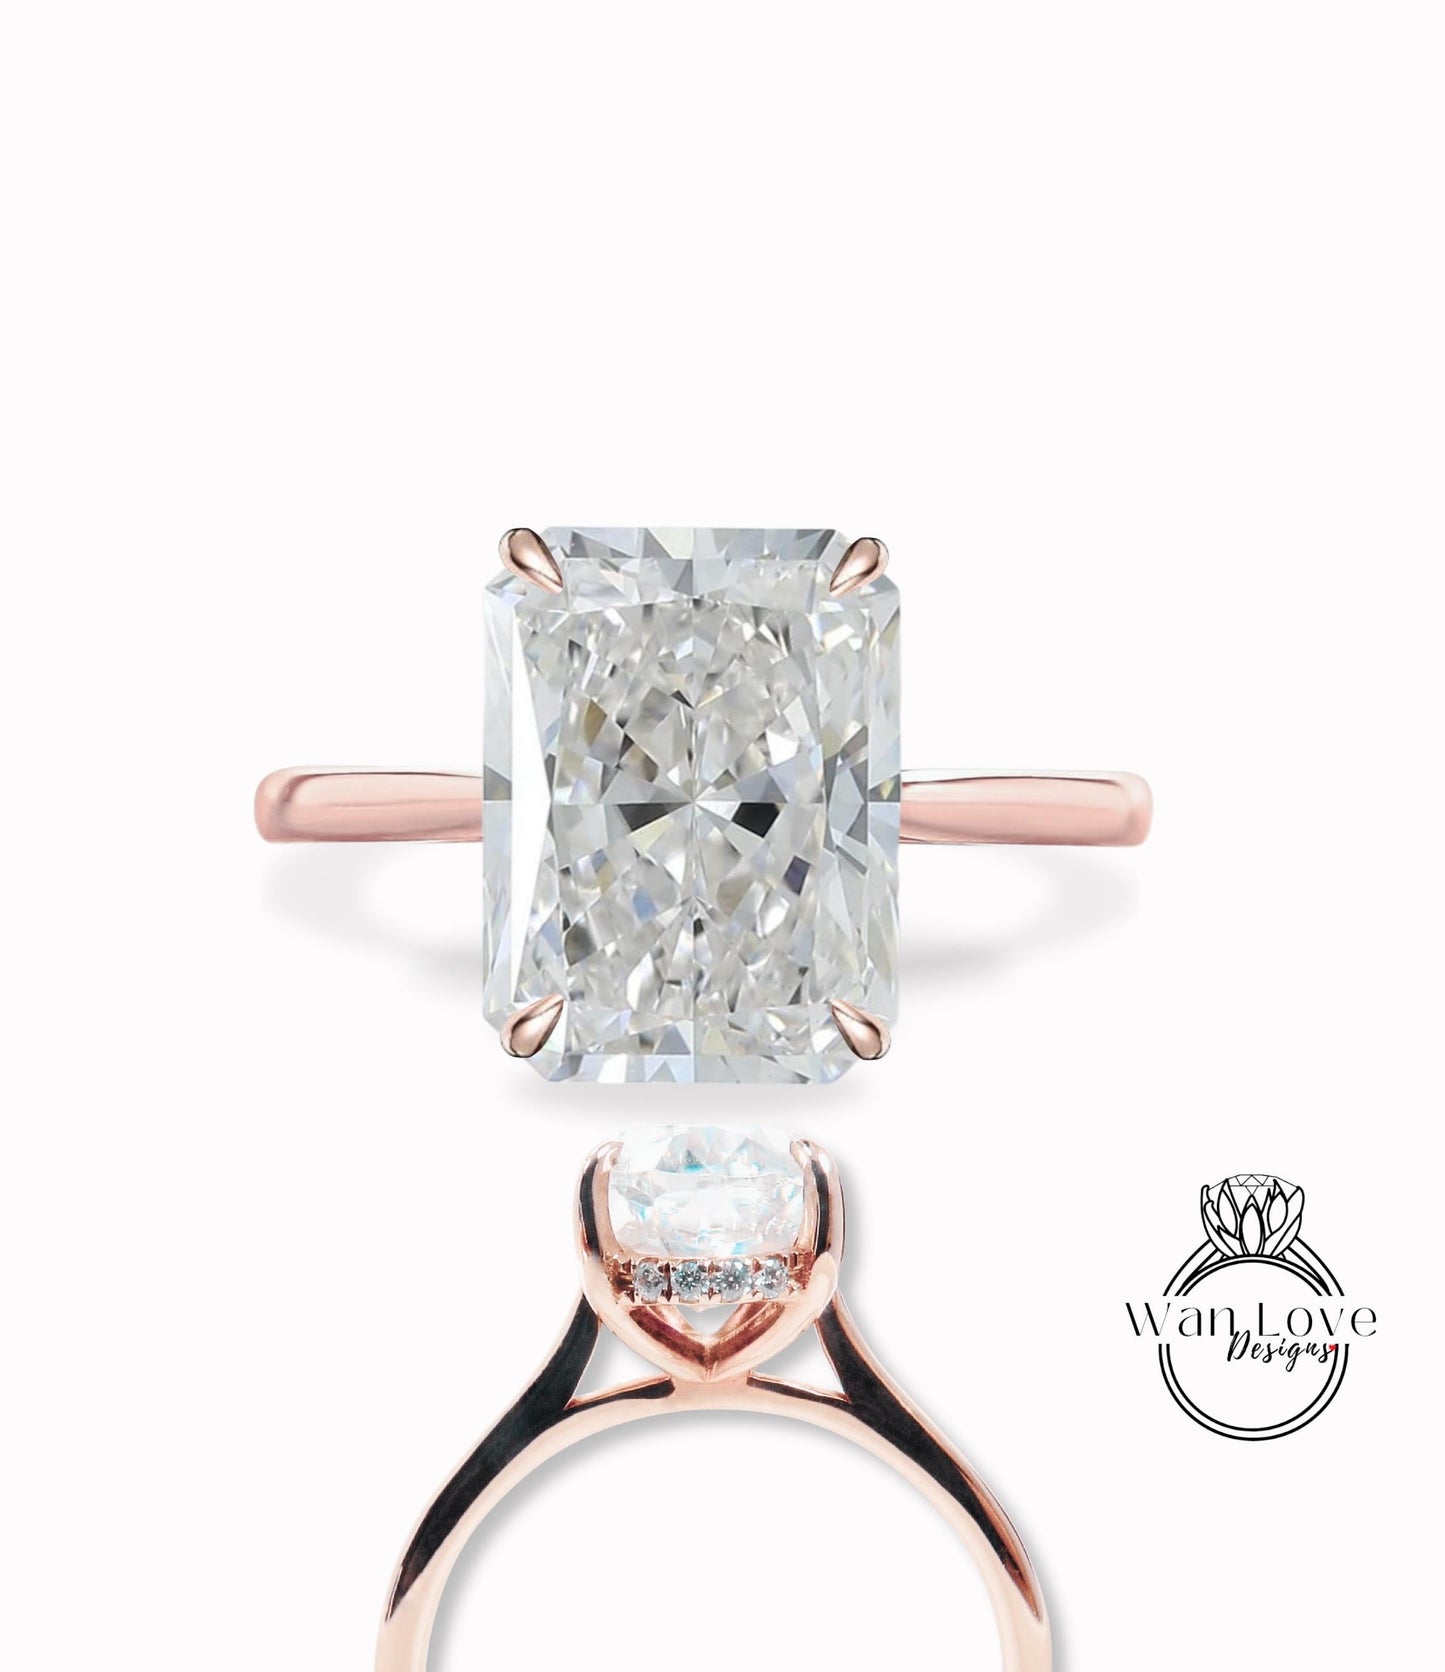 Diamond Side halo Radiant engagement ring Tapered plain band Lab Diamond ring rose gold prong ring Art deco Solitaire wedding bridal Anniversary promise Wan Love Designs